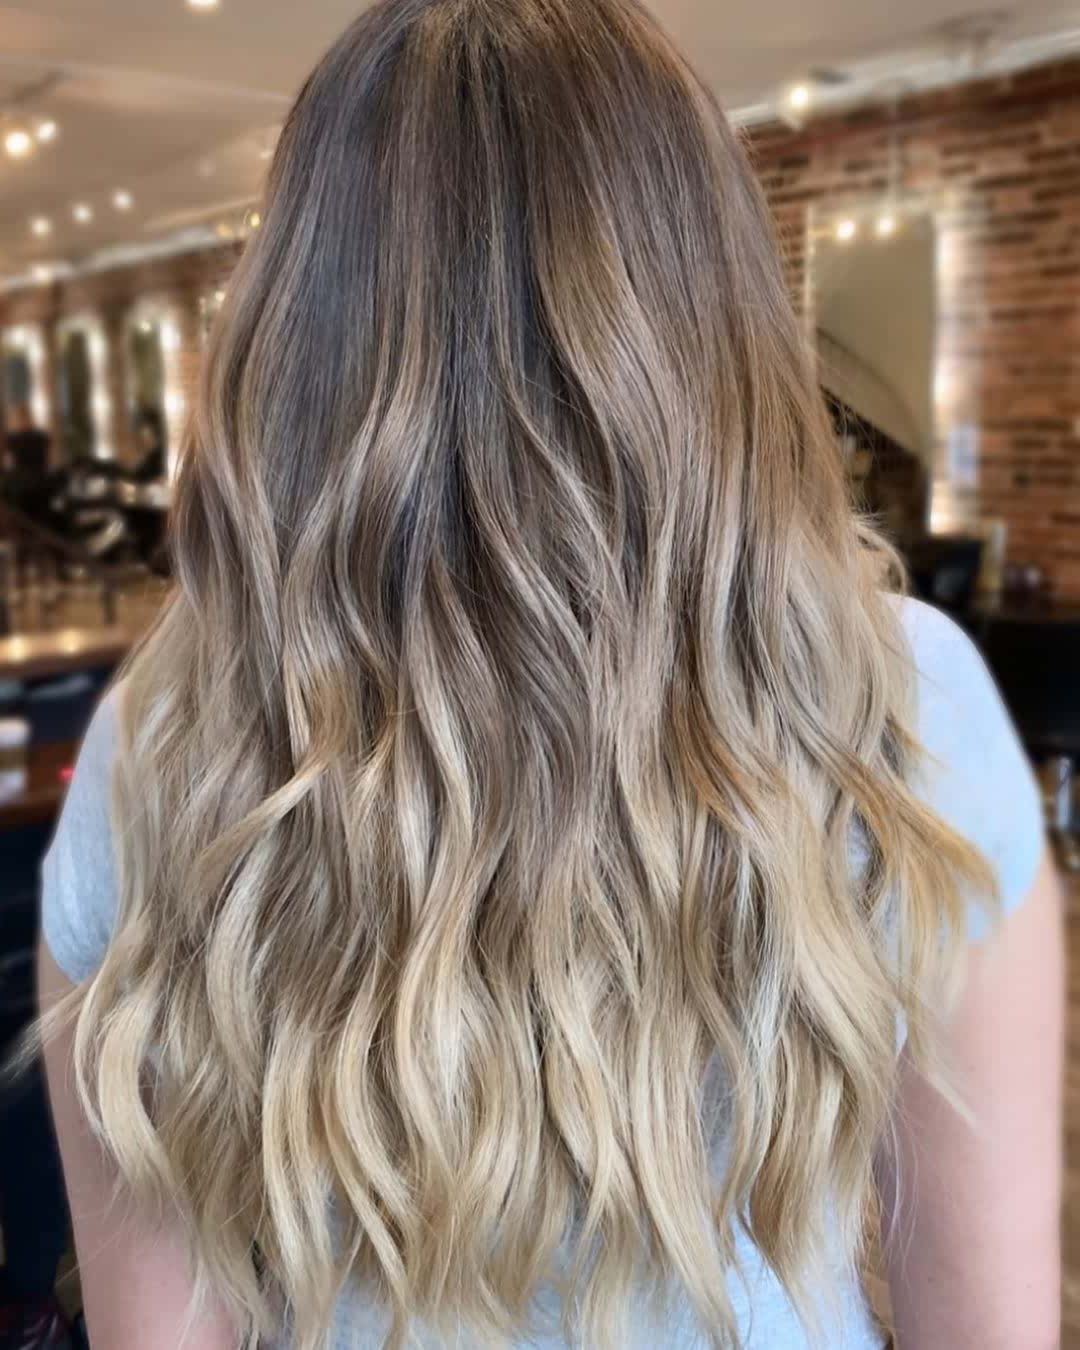 10 Best Beach Wave Hair And Balayage Ideas With Icy Charm! – Hairstyles  Weekly In Beachy Waves With Ombre (View 12 of 25)